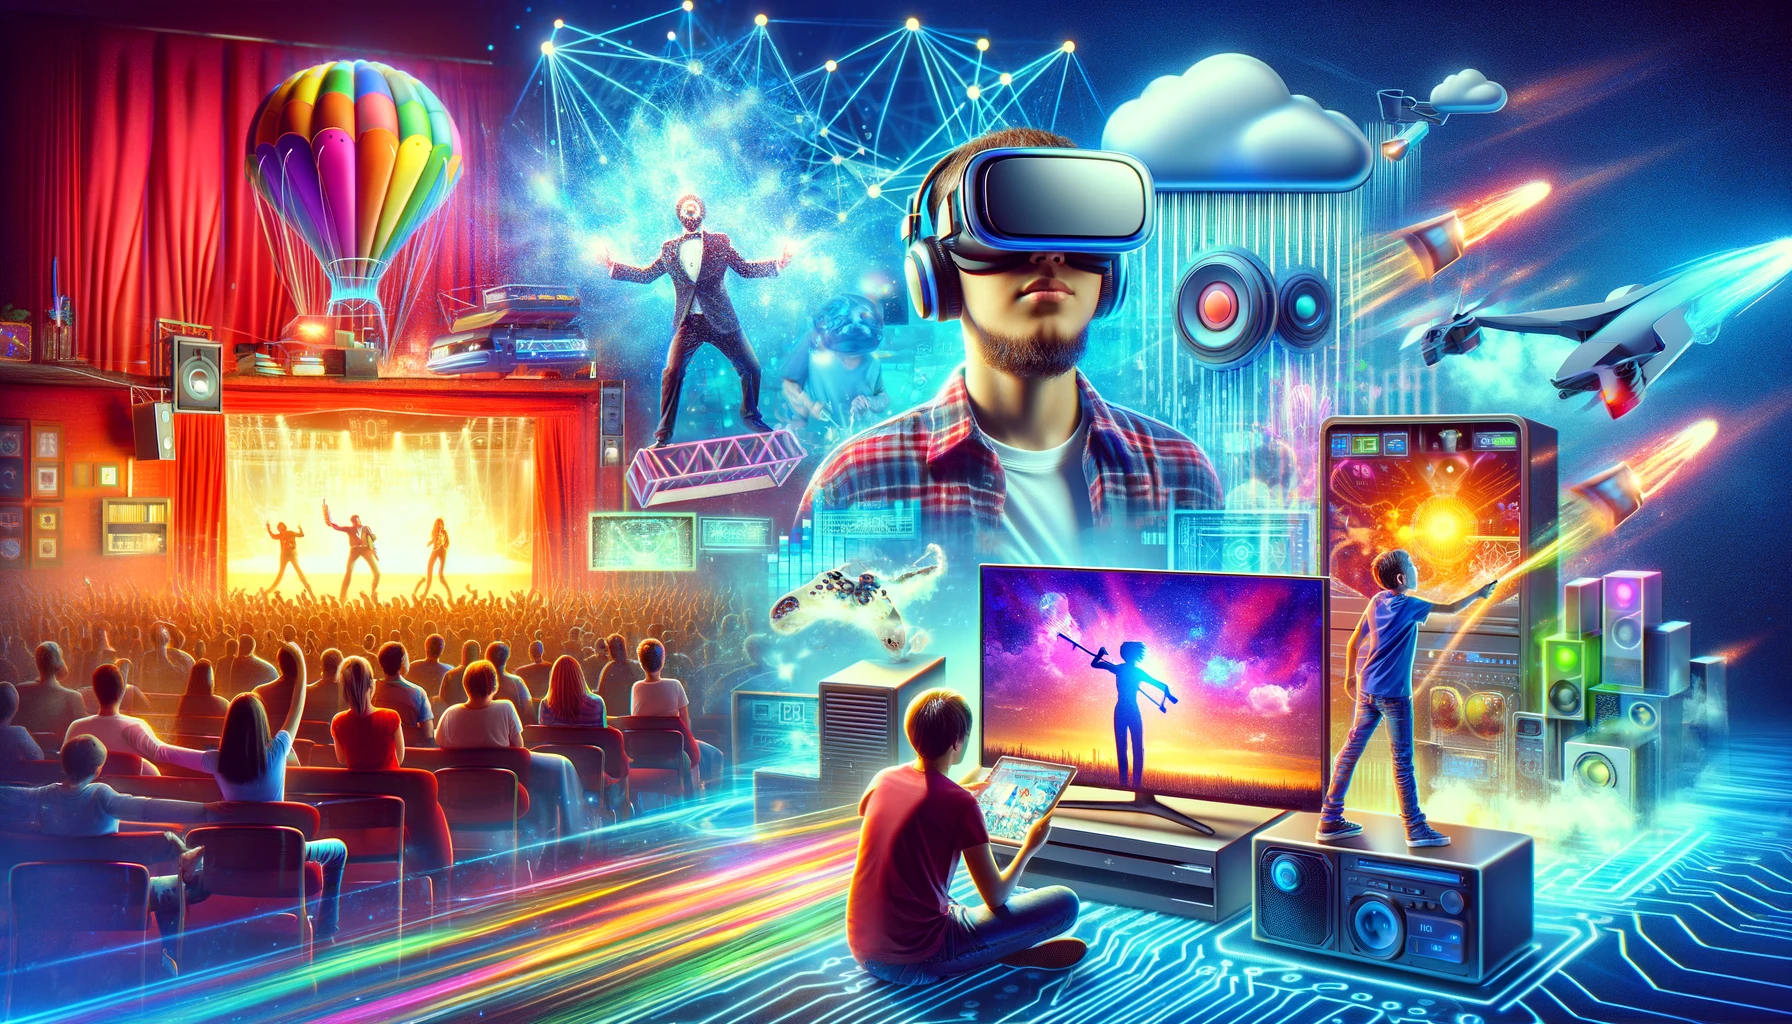 A collage showcasing VR immersion, family movie night, and online gaming, highlighting the digital entertainment boom.